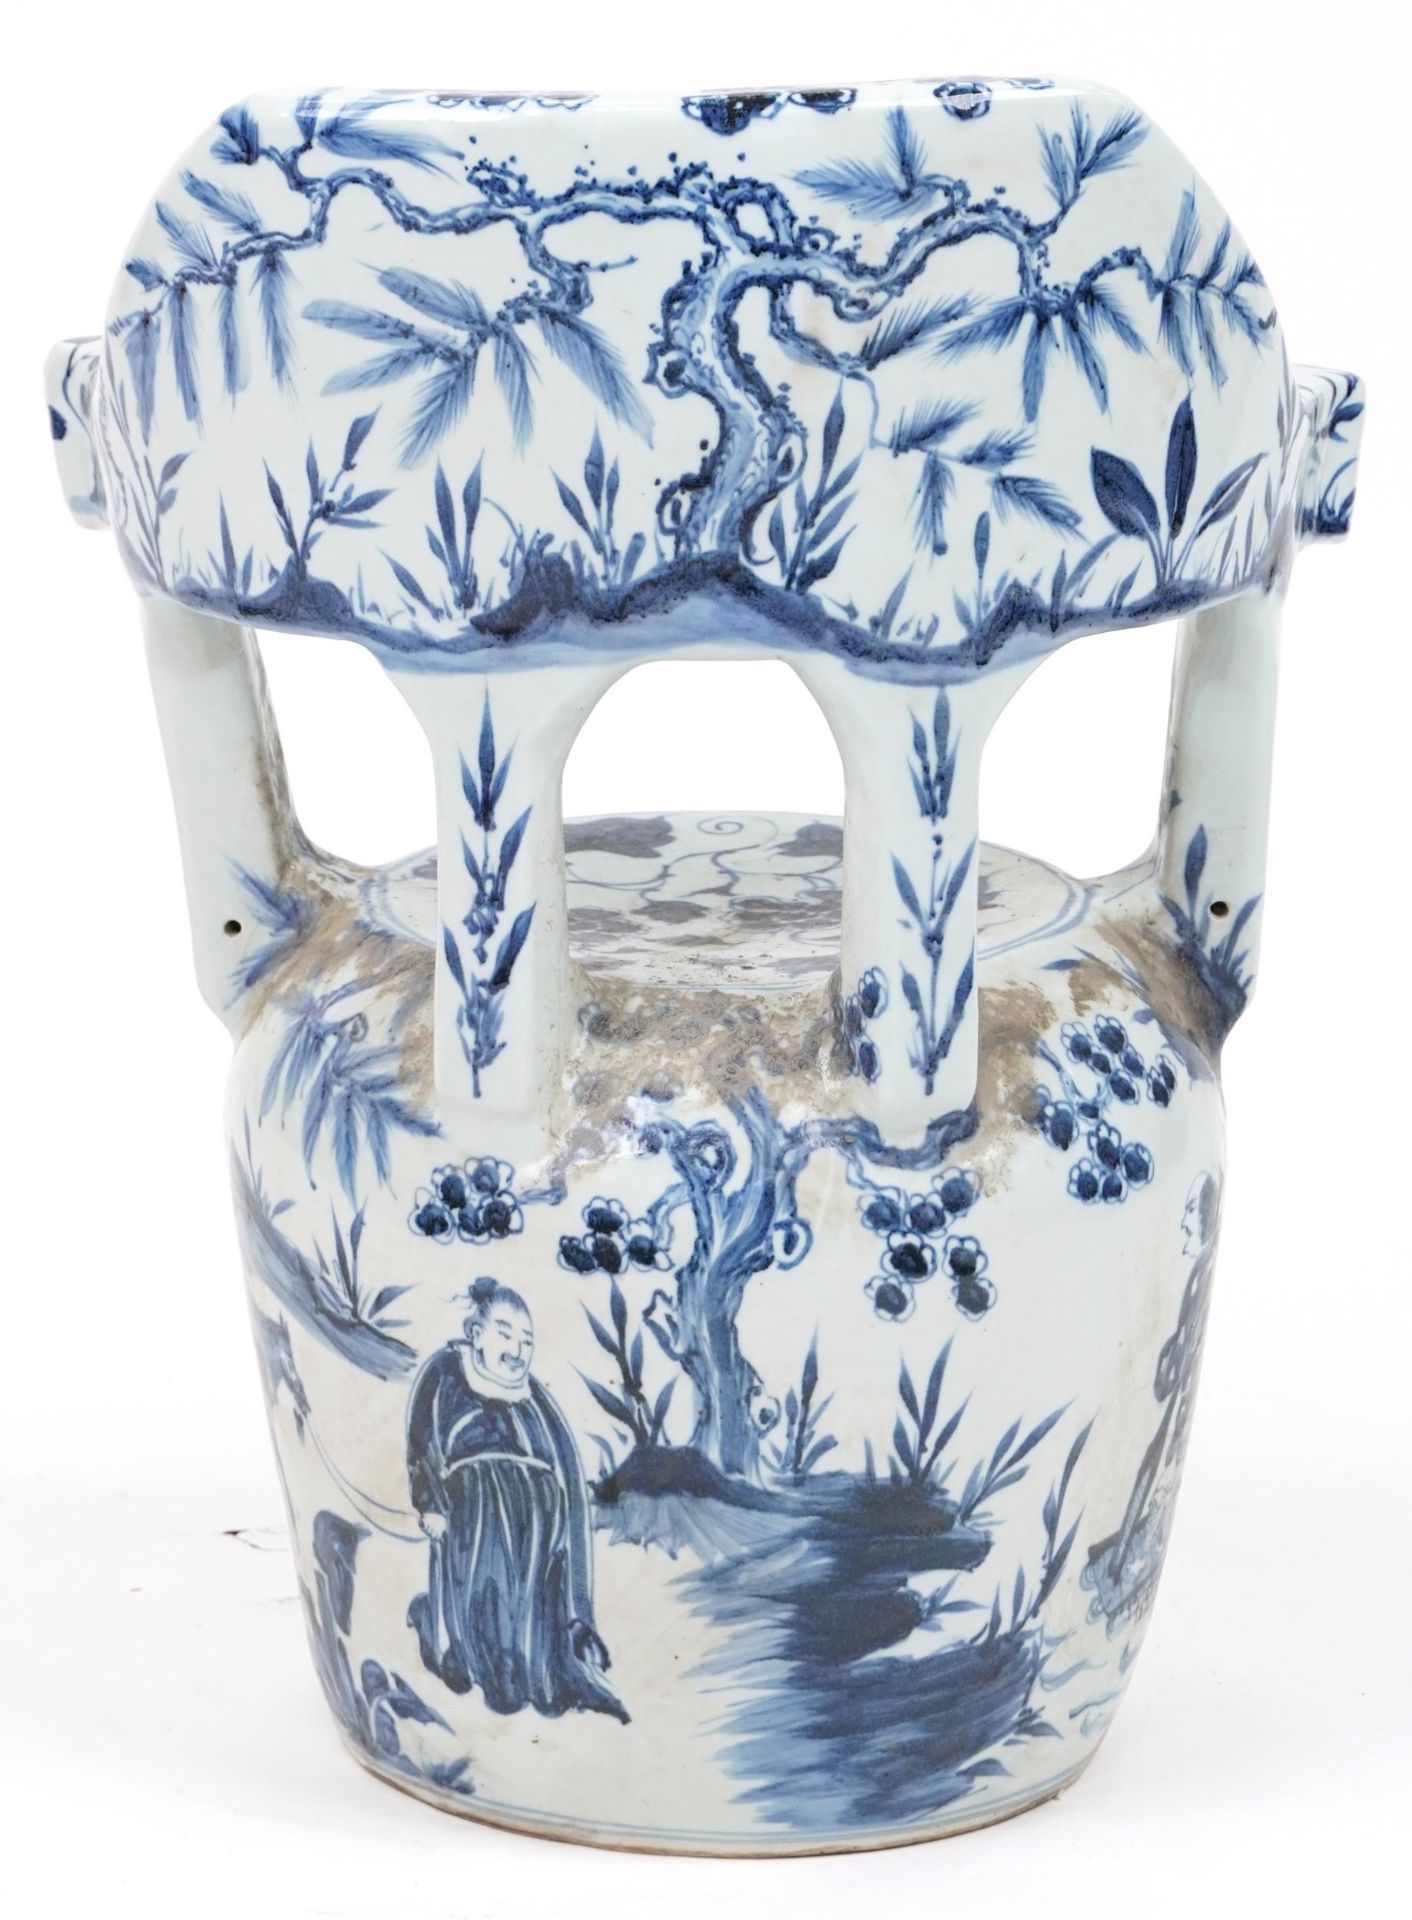 Chinese blue and white porcelain garden seat hand painted with flowers, 65cm high - Image 5 of 7